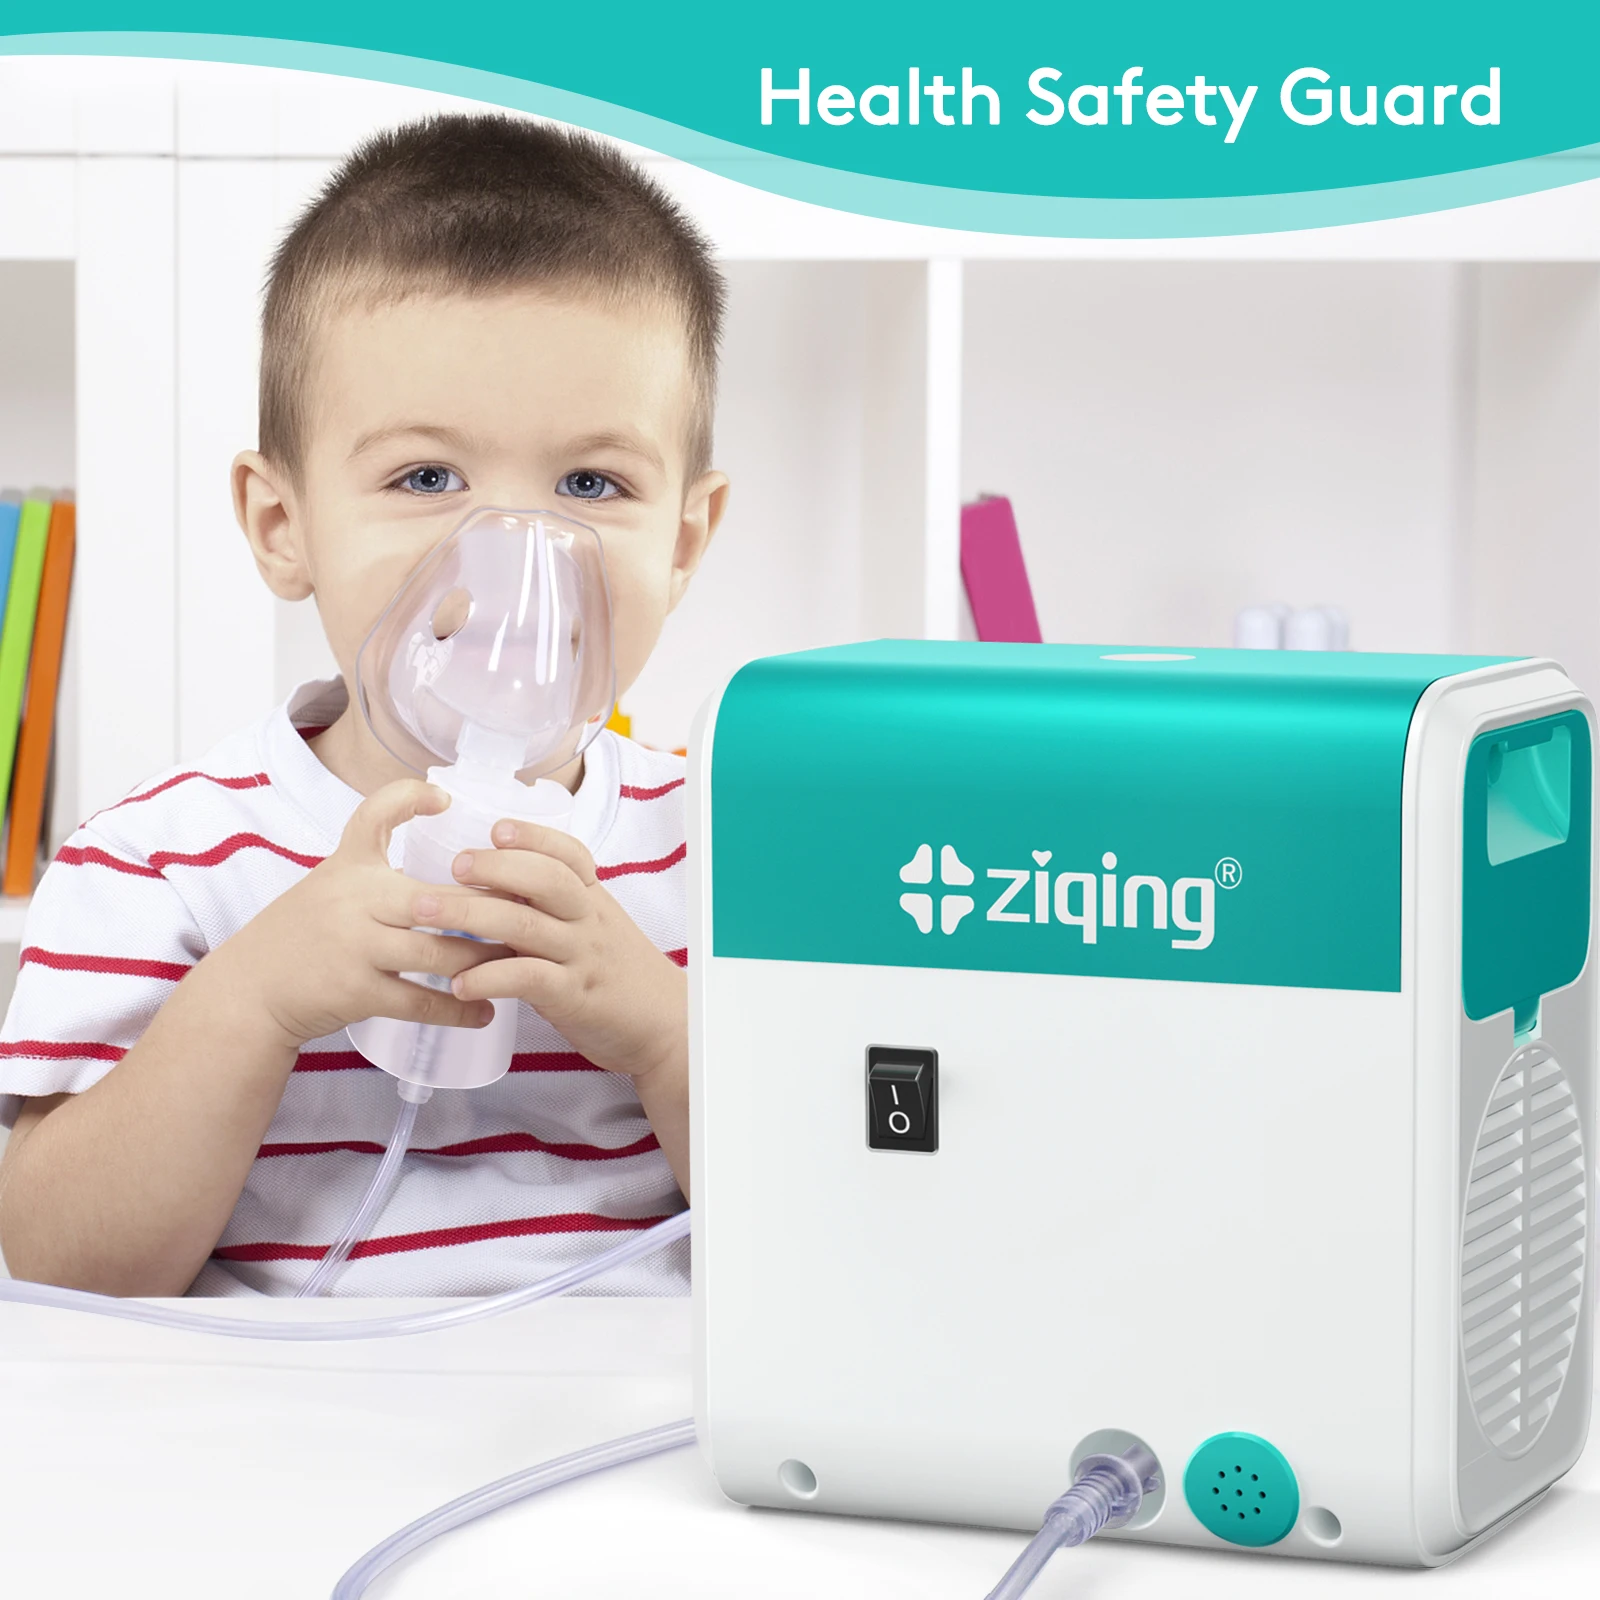 Ziqing Health Care Hands-free Inhale Nebulizer silent Ultrasonic inalador nebulizador Children Adult Automizer Humidificador